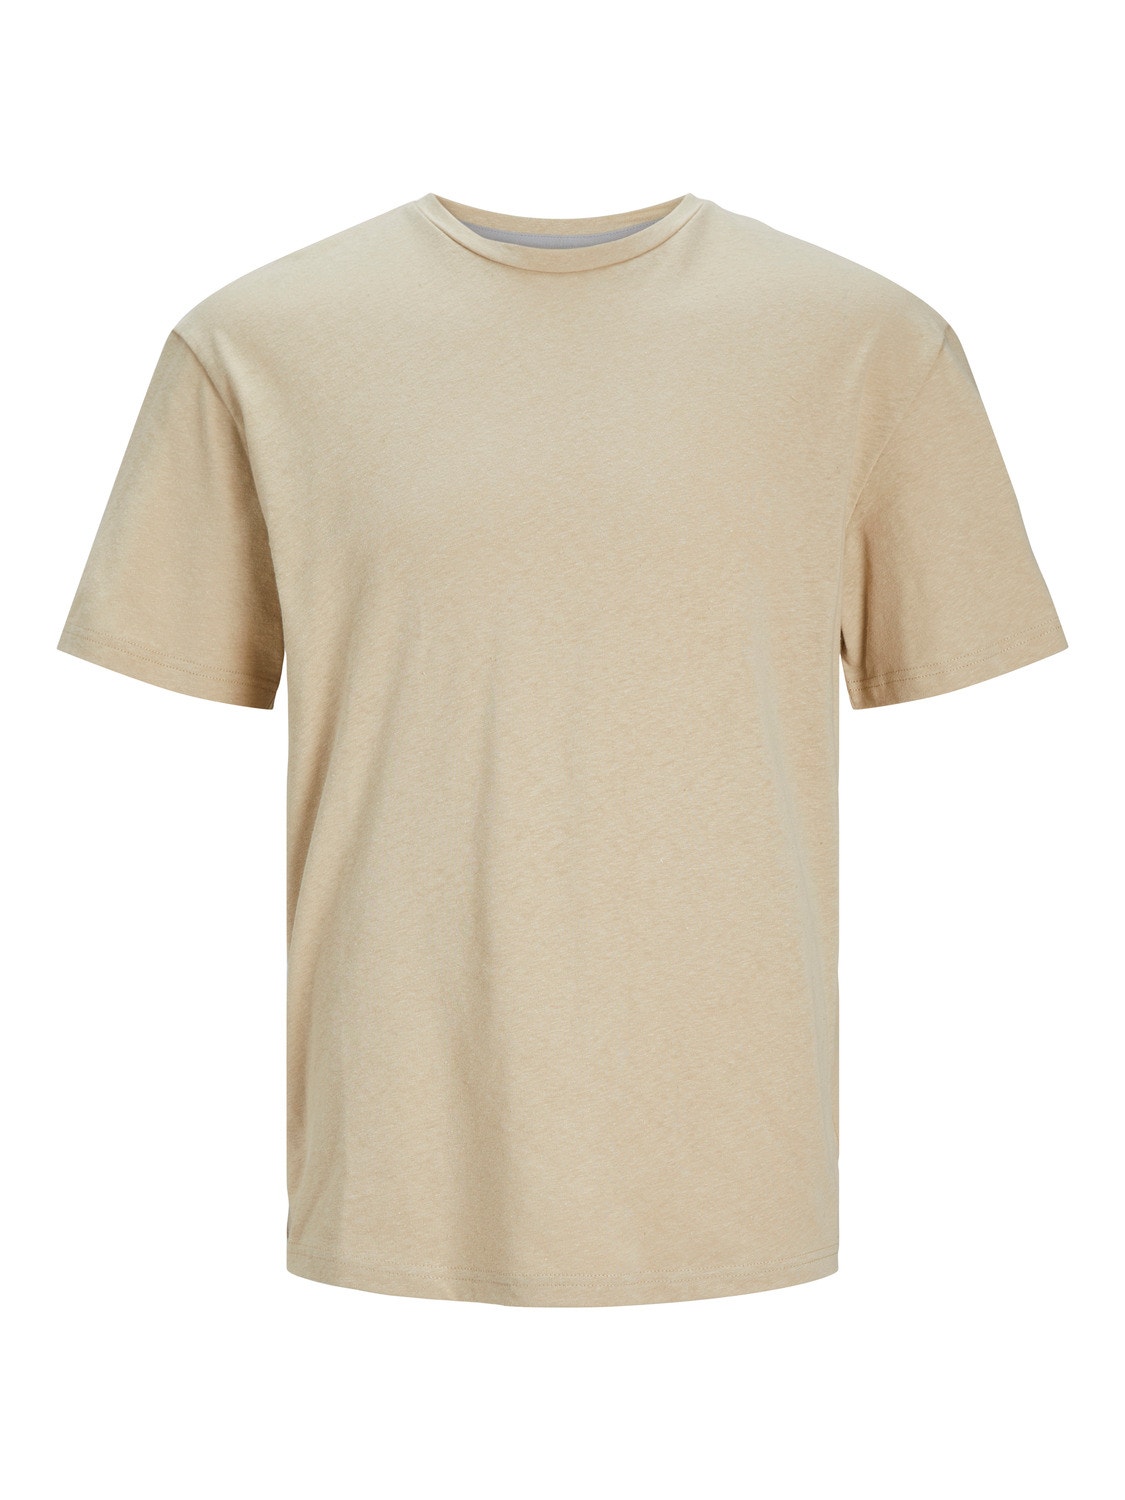 Jack & Jones Relaxed Fit Round Neck Linen T-Shirt -Fields Of Rye - 12252797